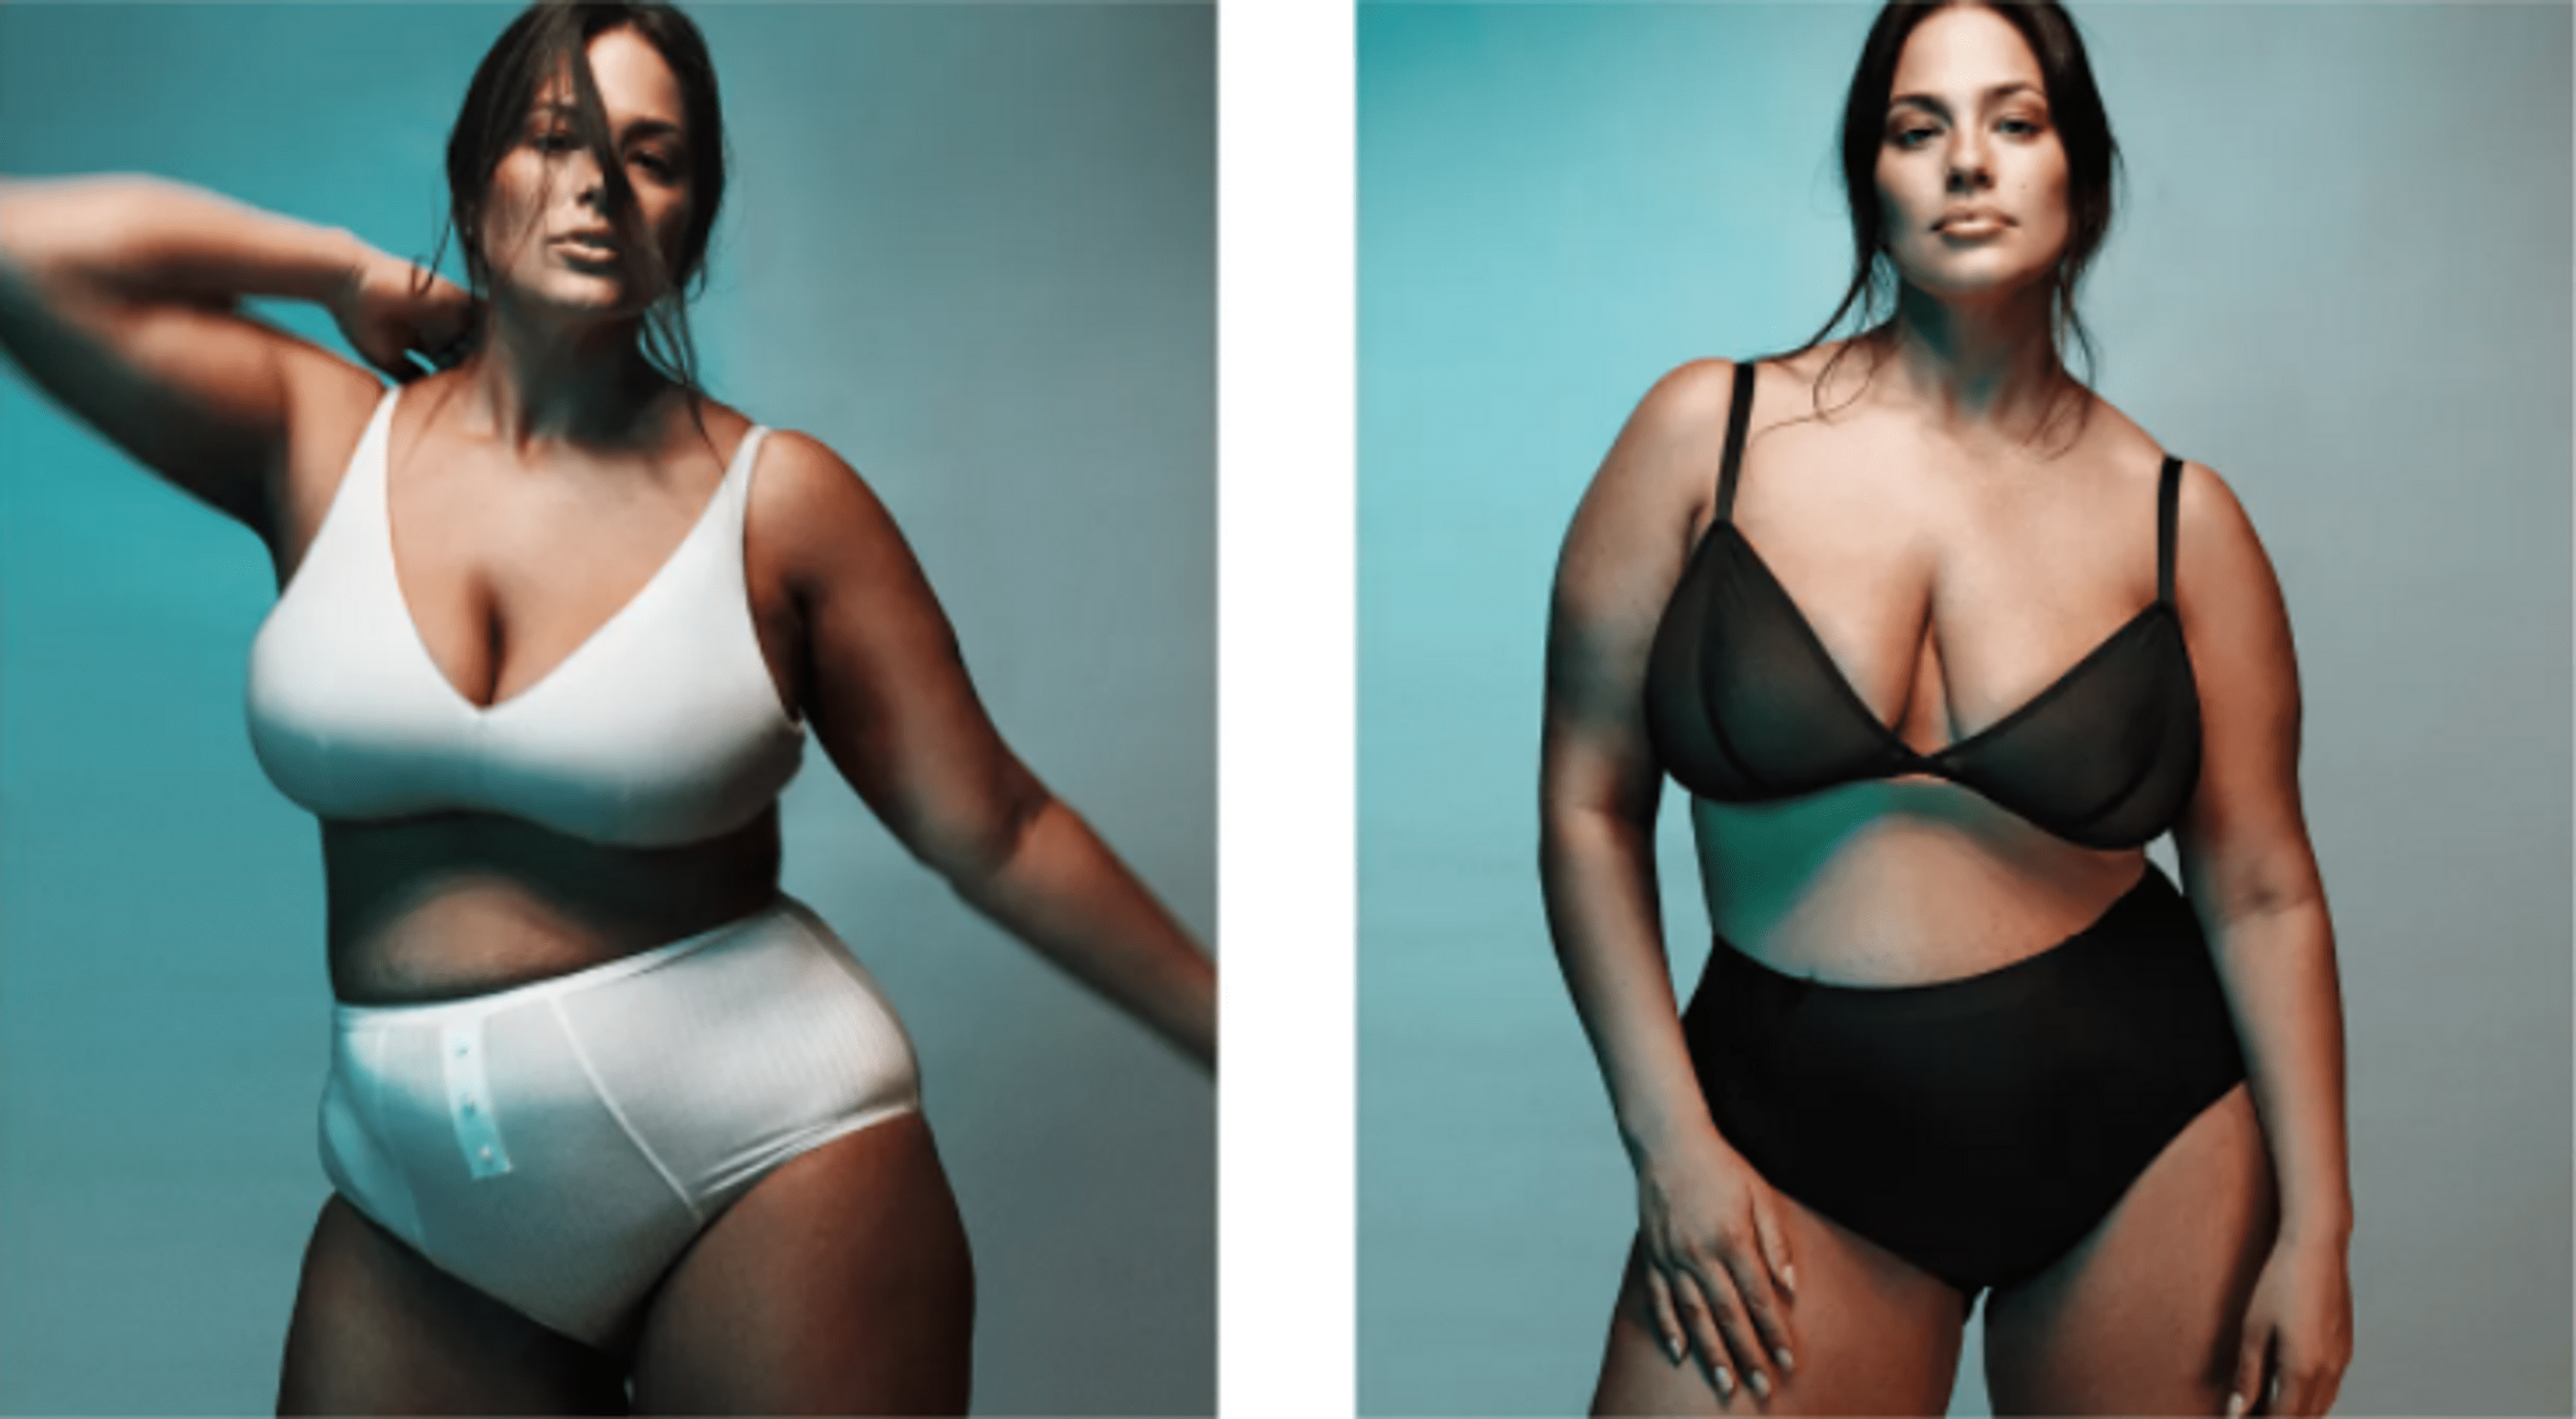 Plus-size model Ashley Graham has teamed up with Knix to launch a lingerie line